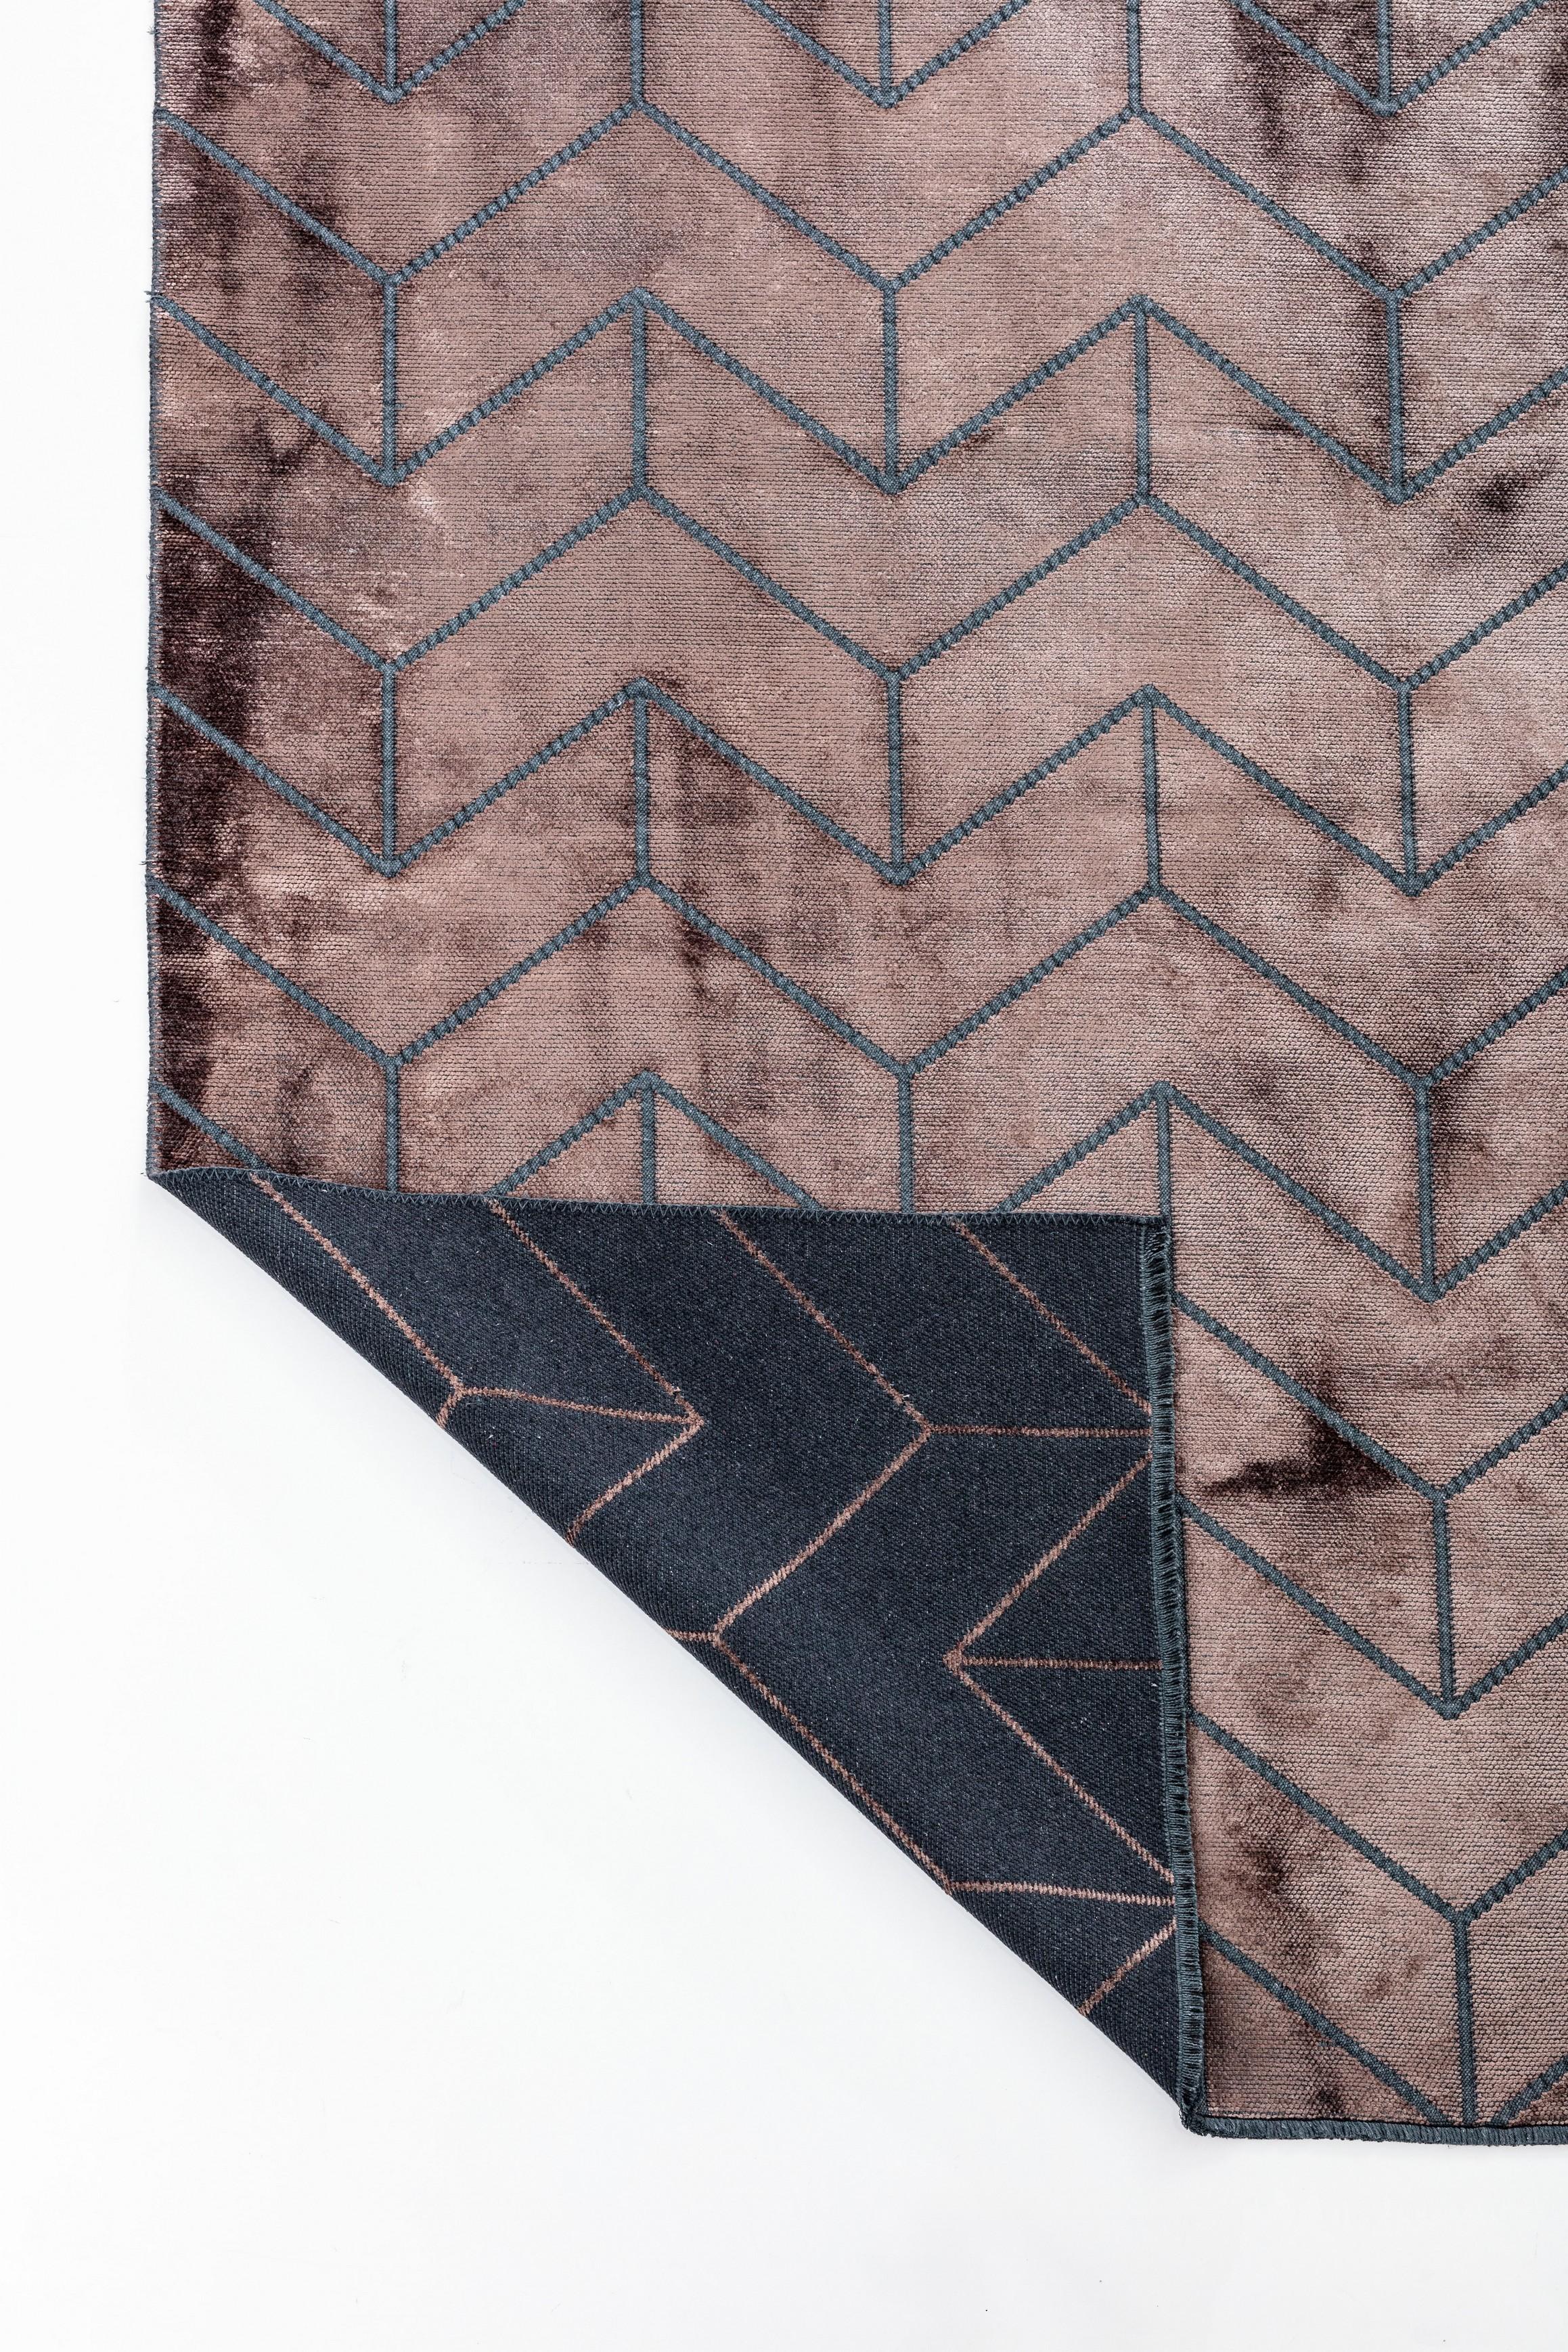 For Sale:  (Brown) Modern Chevron Luxury Hand-Finished Area Rug 3